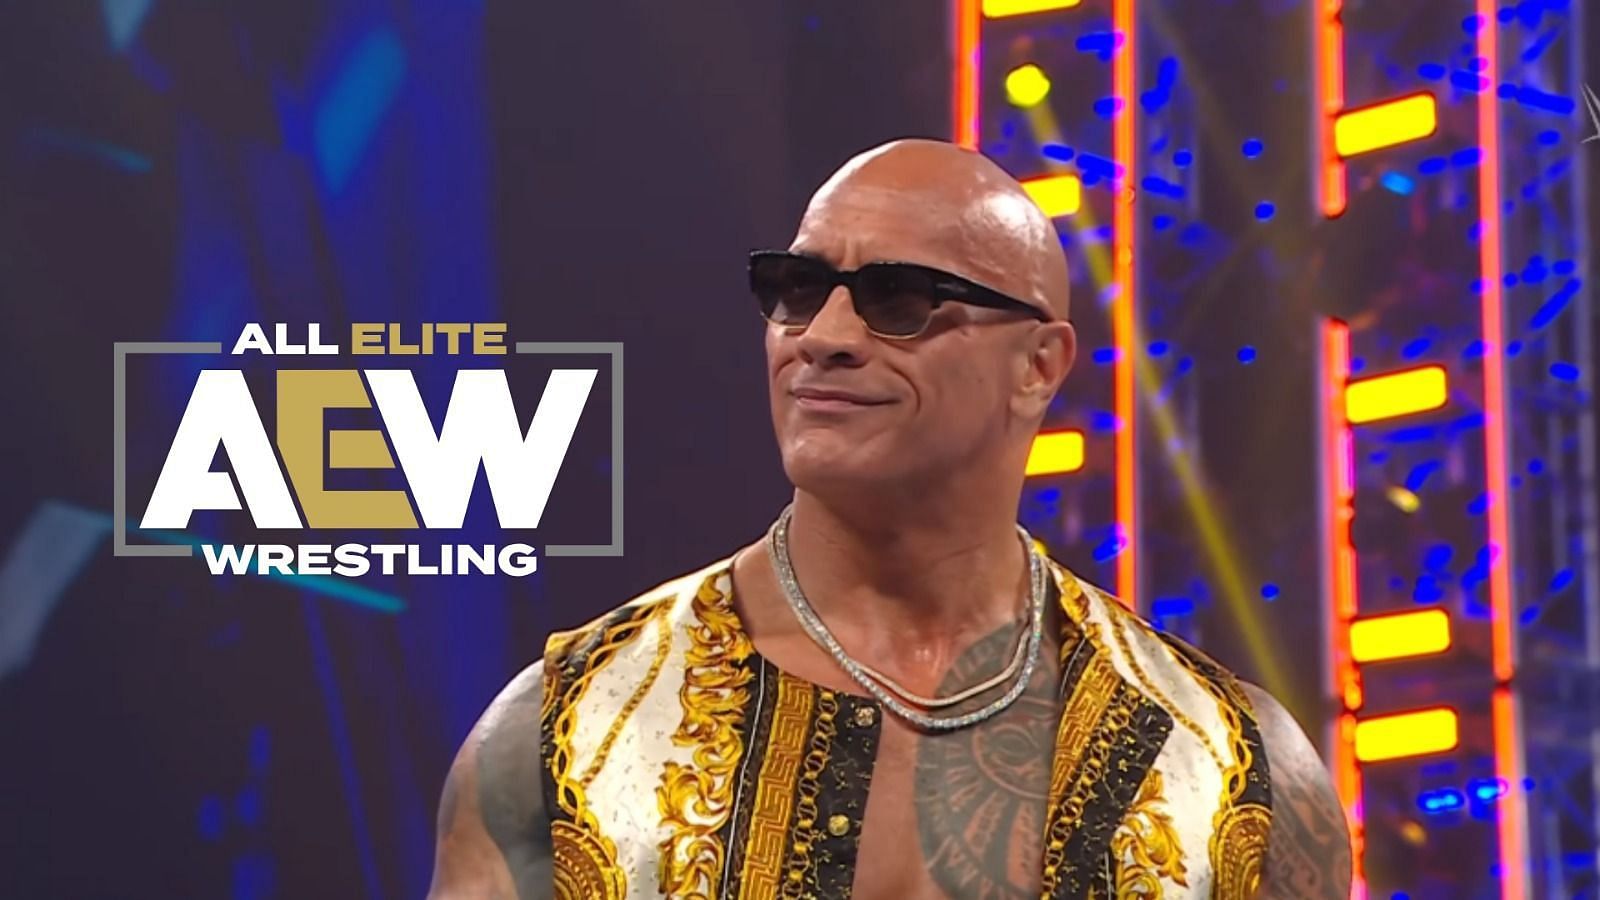 The Rock joined forces with The Bloodline on SmackDown this week. [Image credits: WWE YpuTube and AEW website]